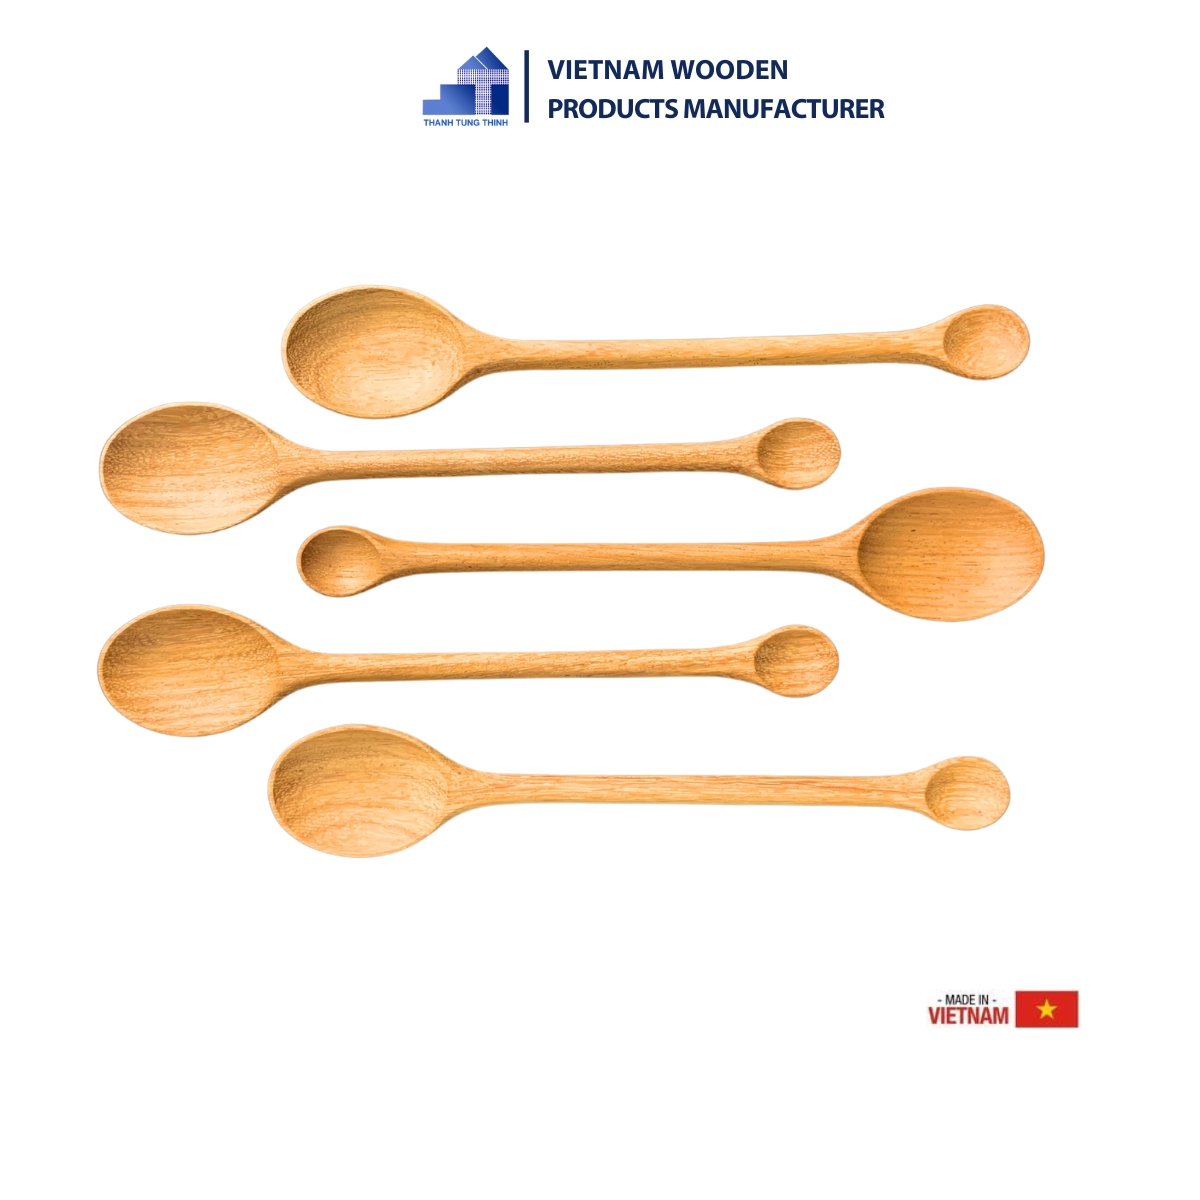 Wooden measuring spoon with two heads - a unique and beautiful product